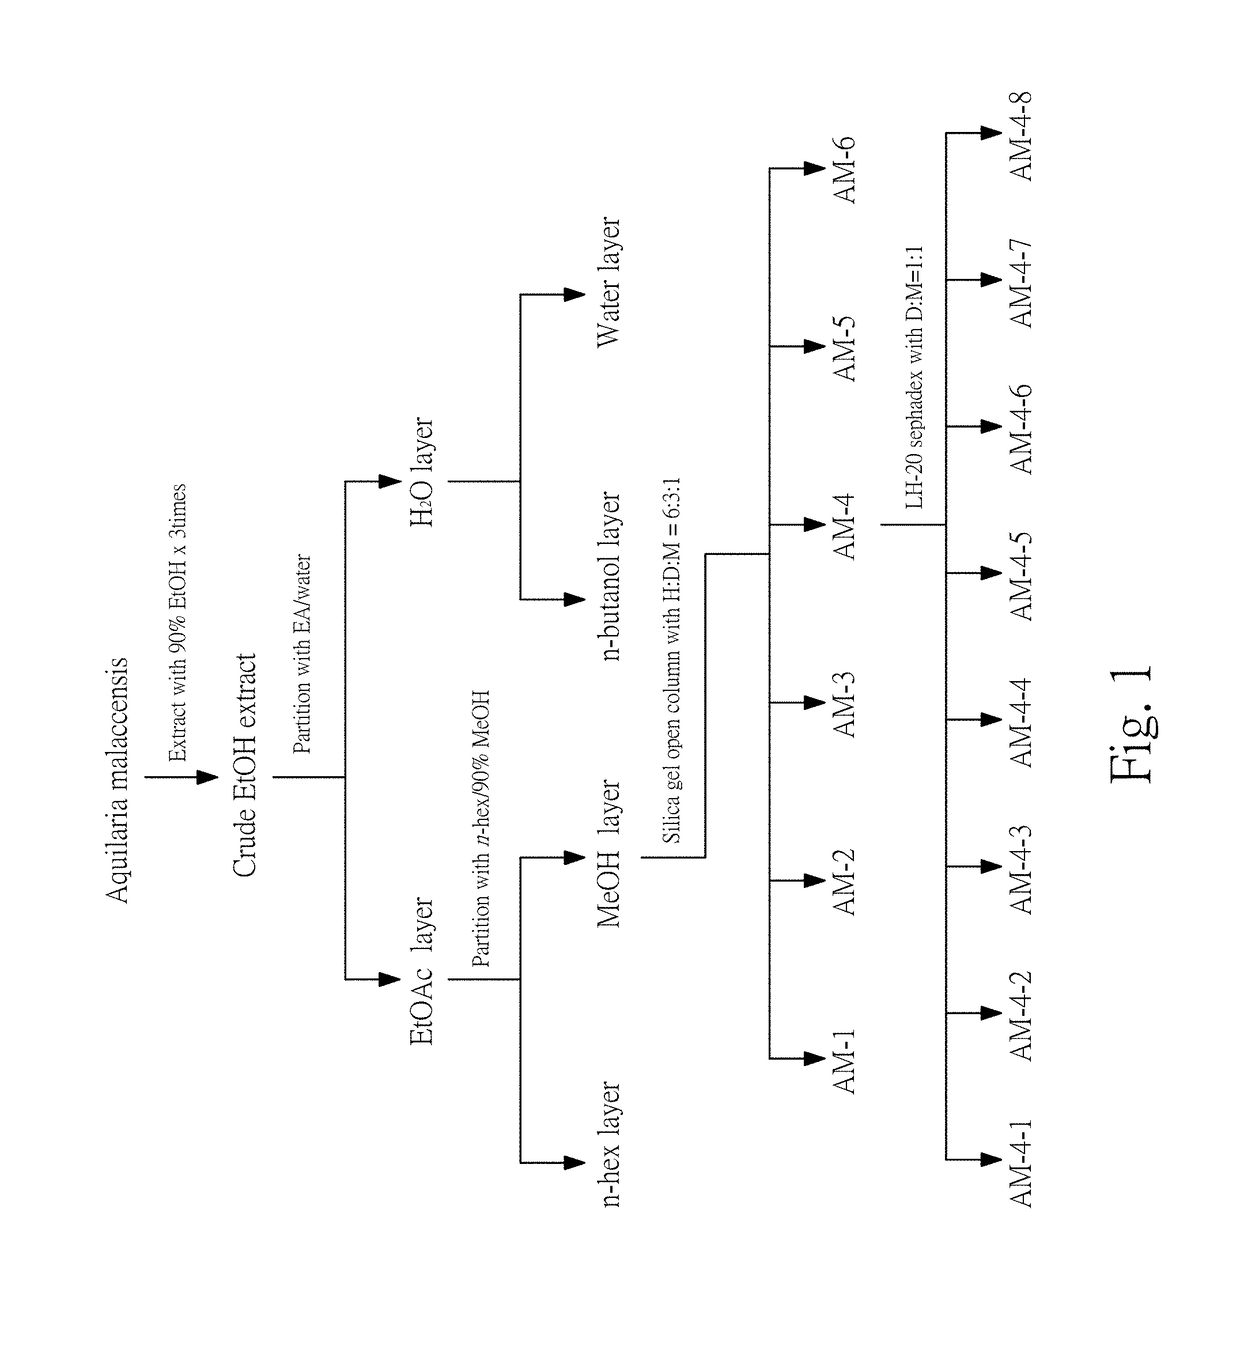 Compositions and methods of antiallergic phorbol ester and phorbol derivatives as the main active ingredients from the seeds of aquilaria malaccensis